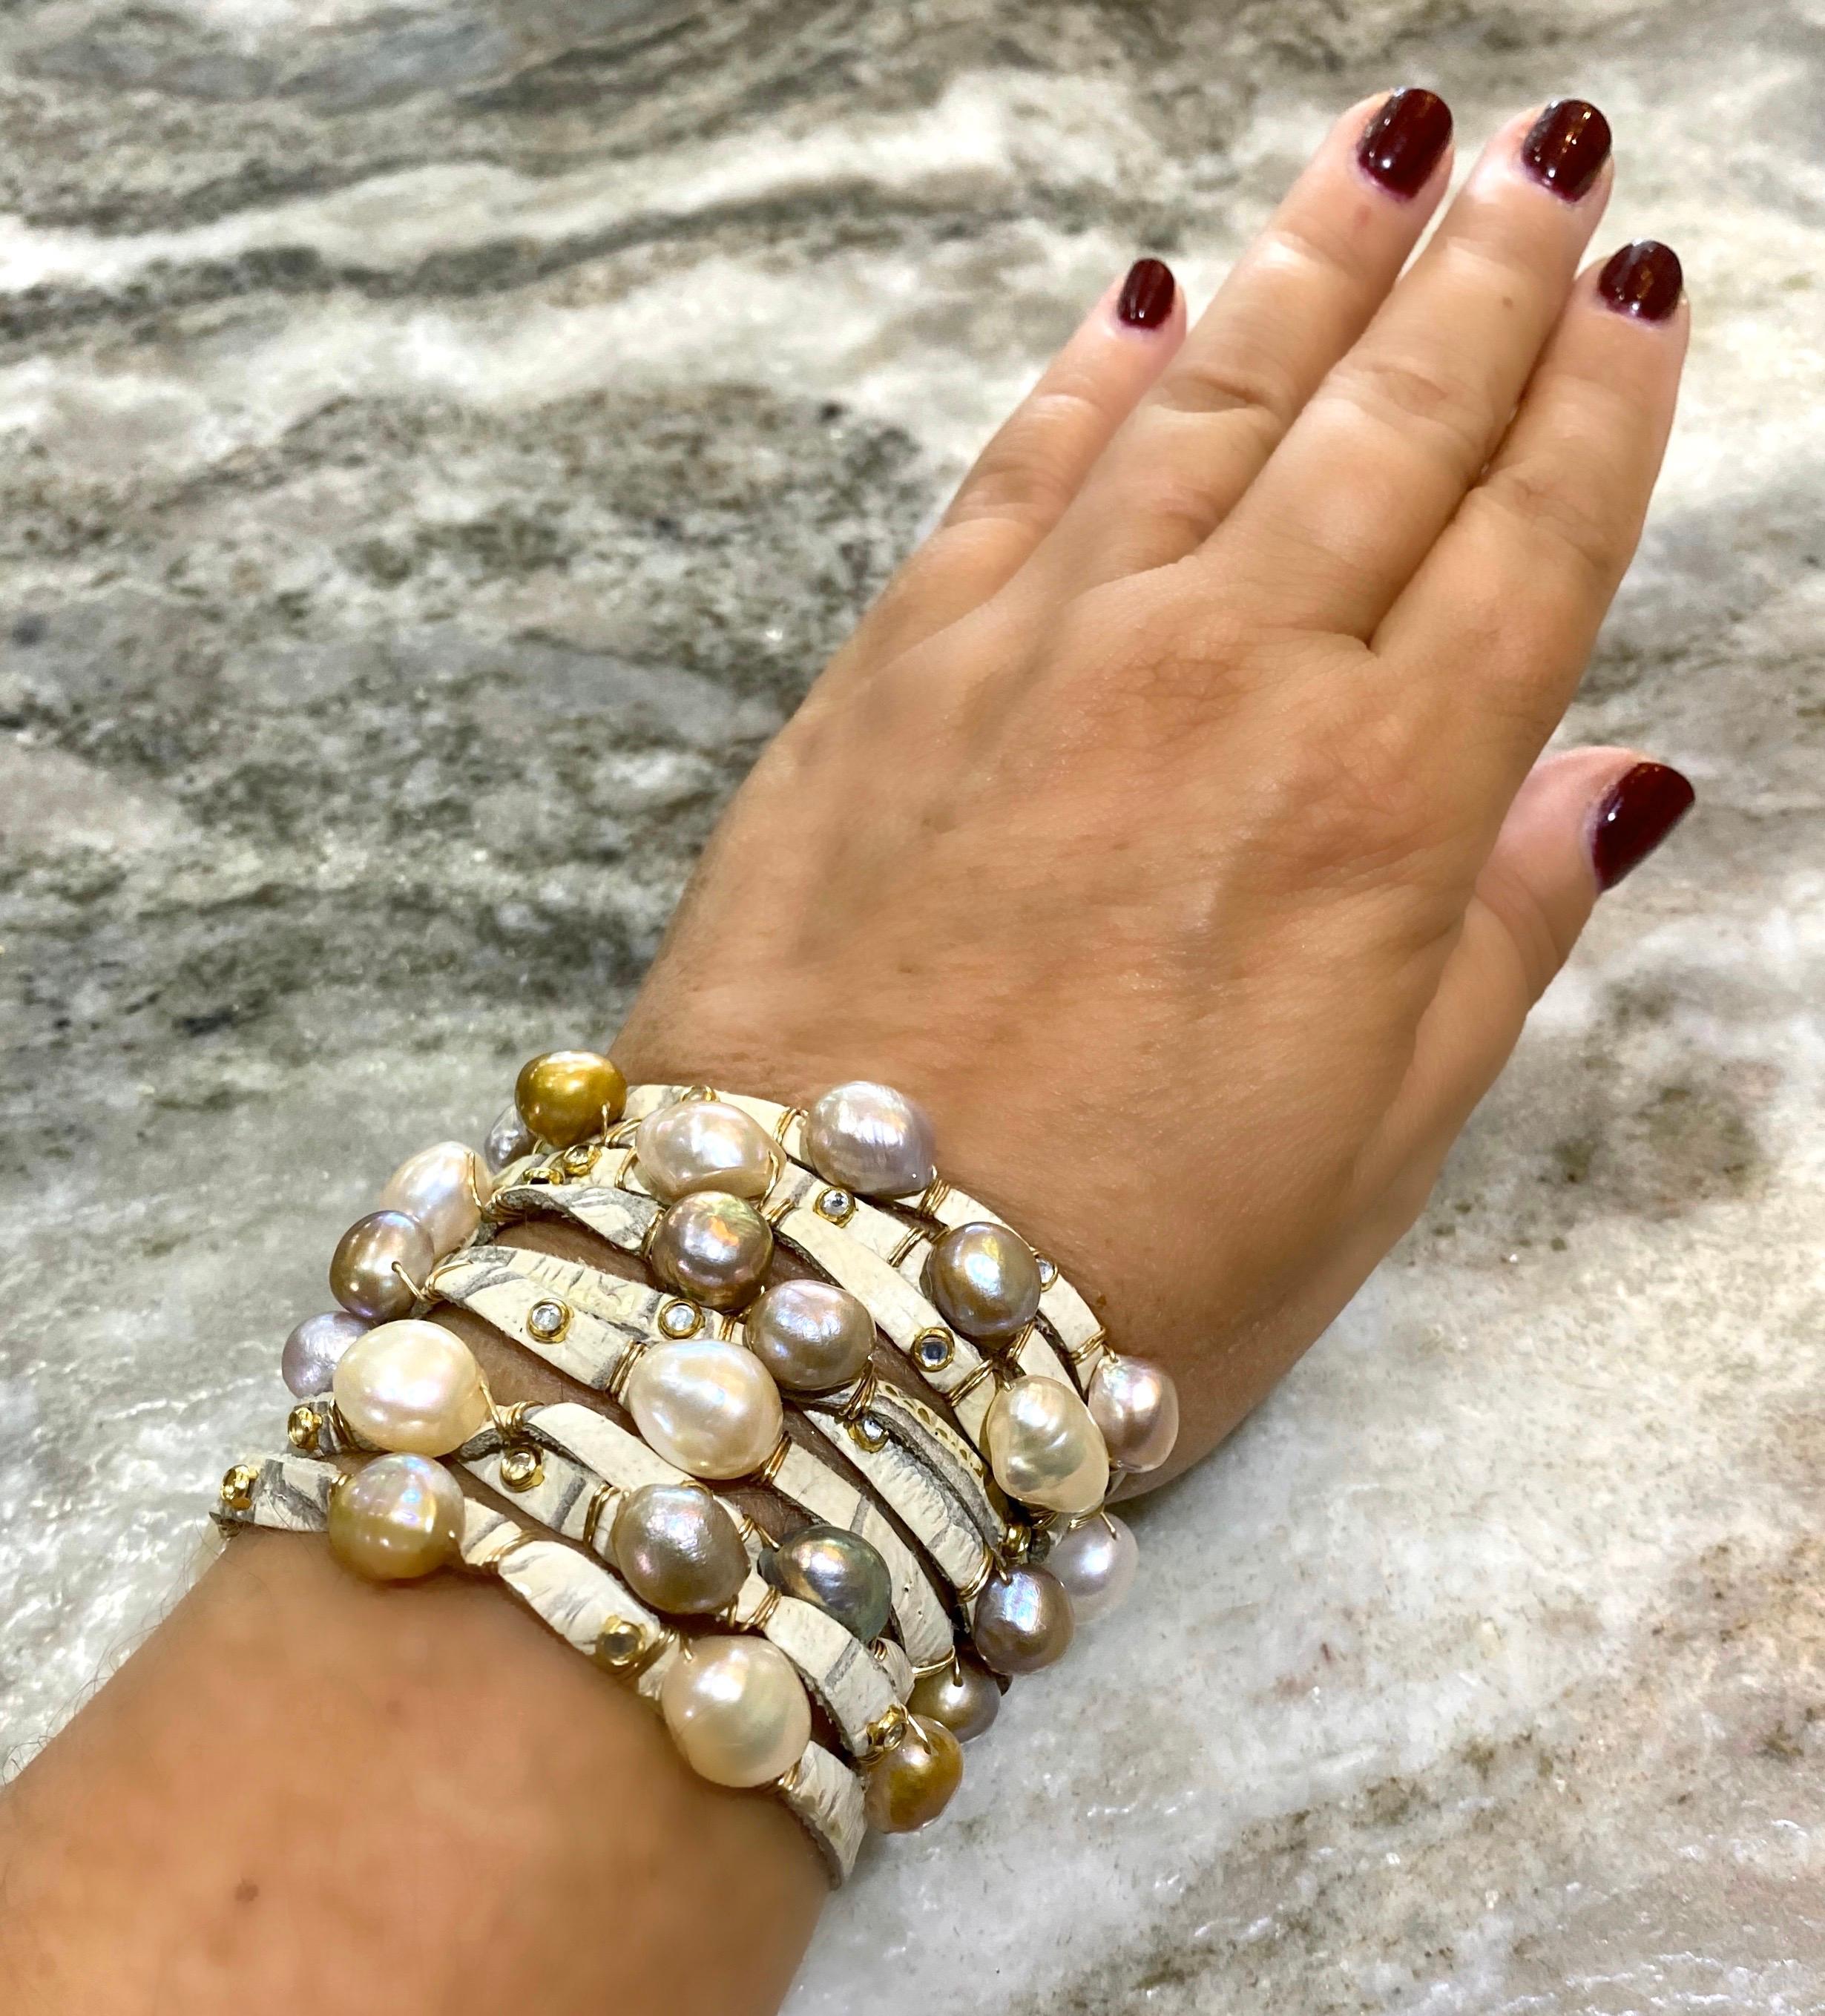 Bijoux De Mer signature leather cuff is adorned with naturally colored, baroque freshwater and Edision pearls hand-wired in 14k gold.  The cuff itself is a cream colored, embossed crocodile leather, and is studded with sparkly bezel-set crystal